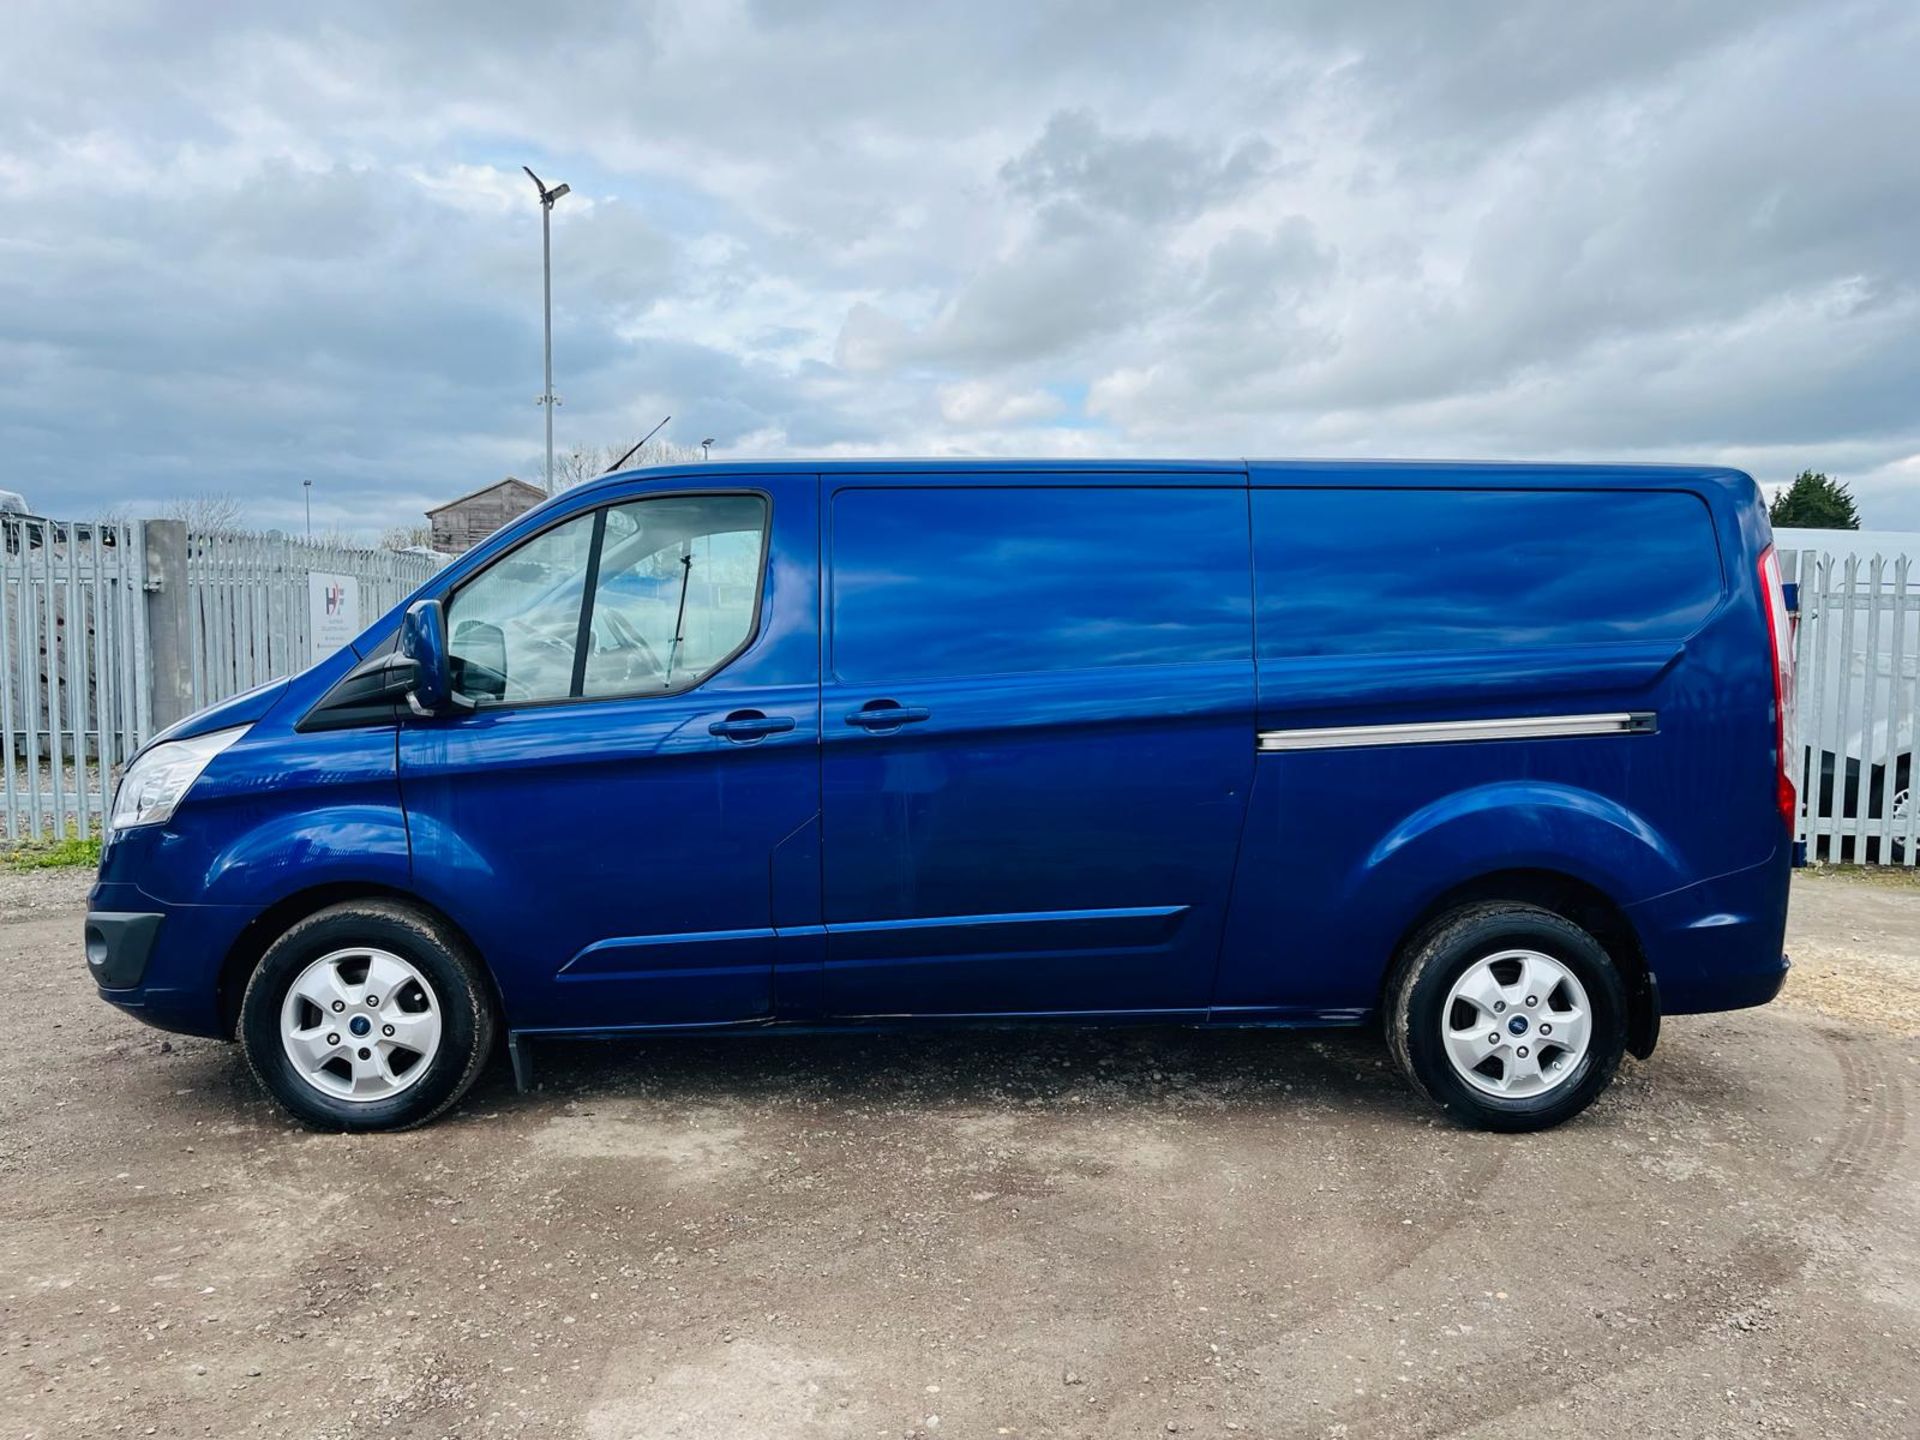 ** ON SALE ** Ford Transit Custom Limited 130 290 L3 H1 2.0 TDCI - ULEZ Compliant -Air Conditioning - Image 4 of 28